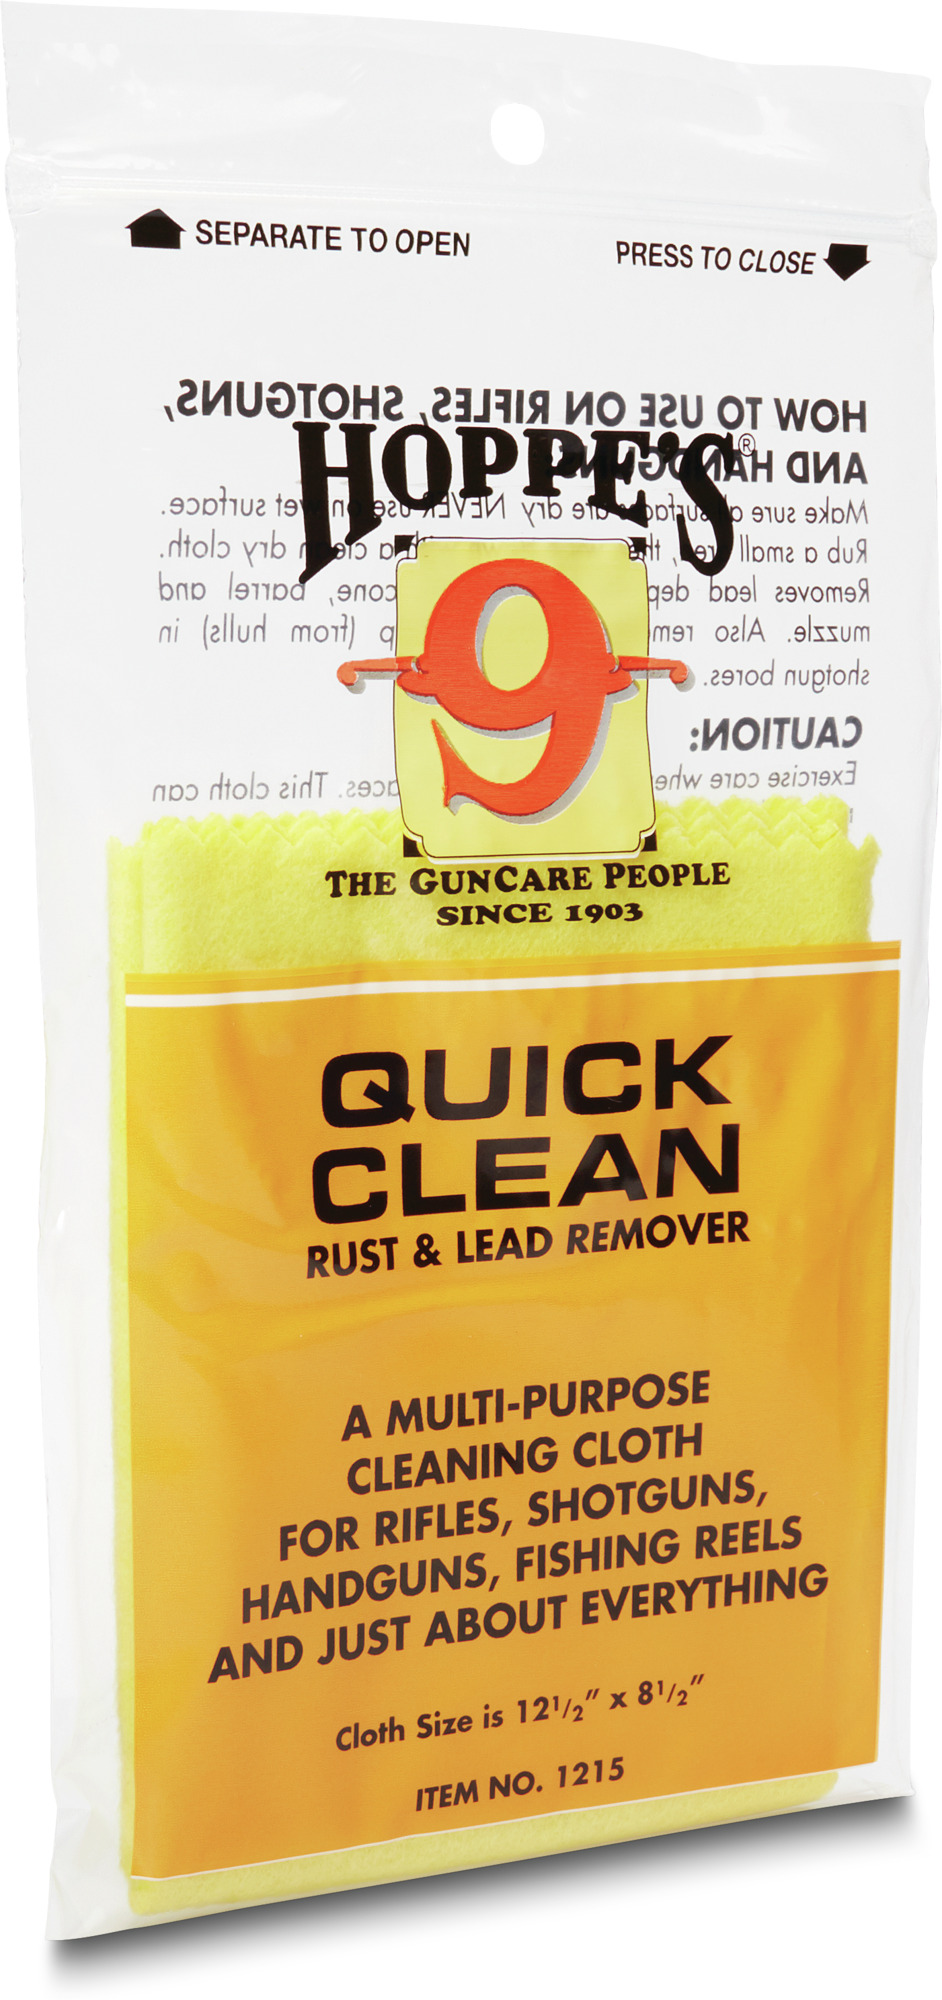 Details about   Hoppe’s Lead-B-Gone Skin Cleaning Wipes New Sealed! 